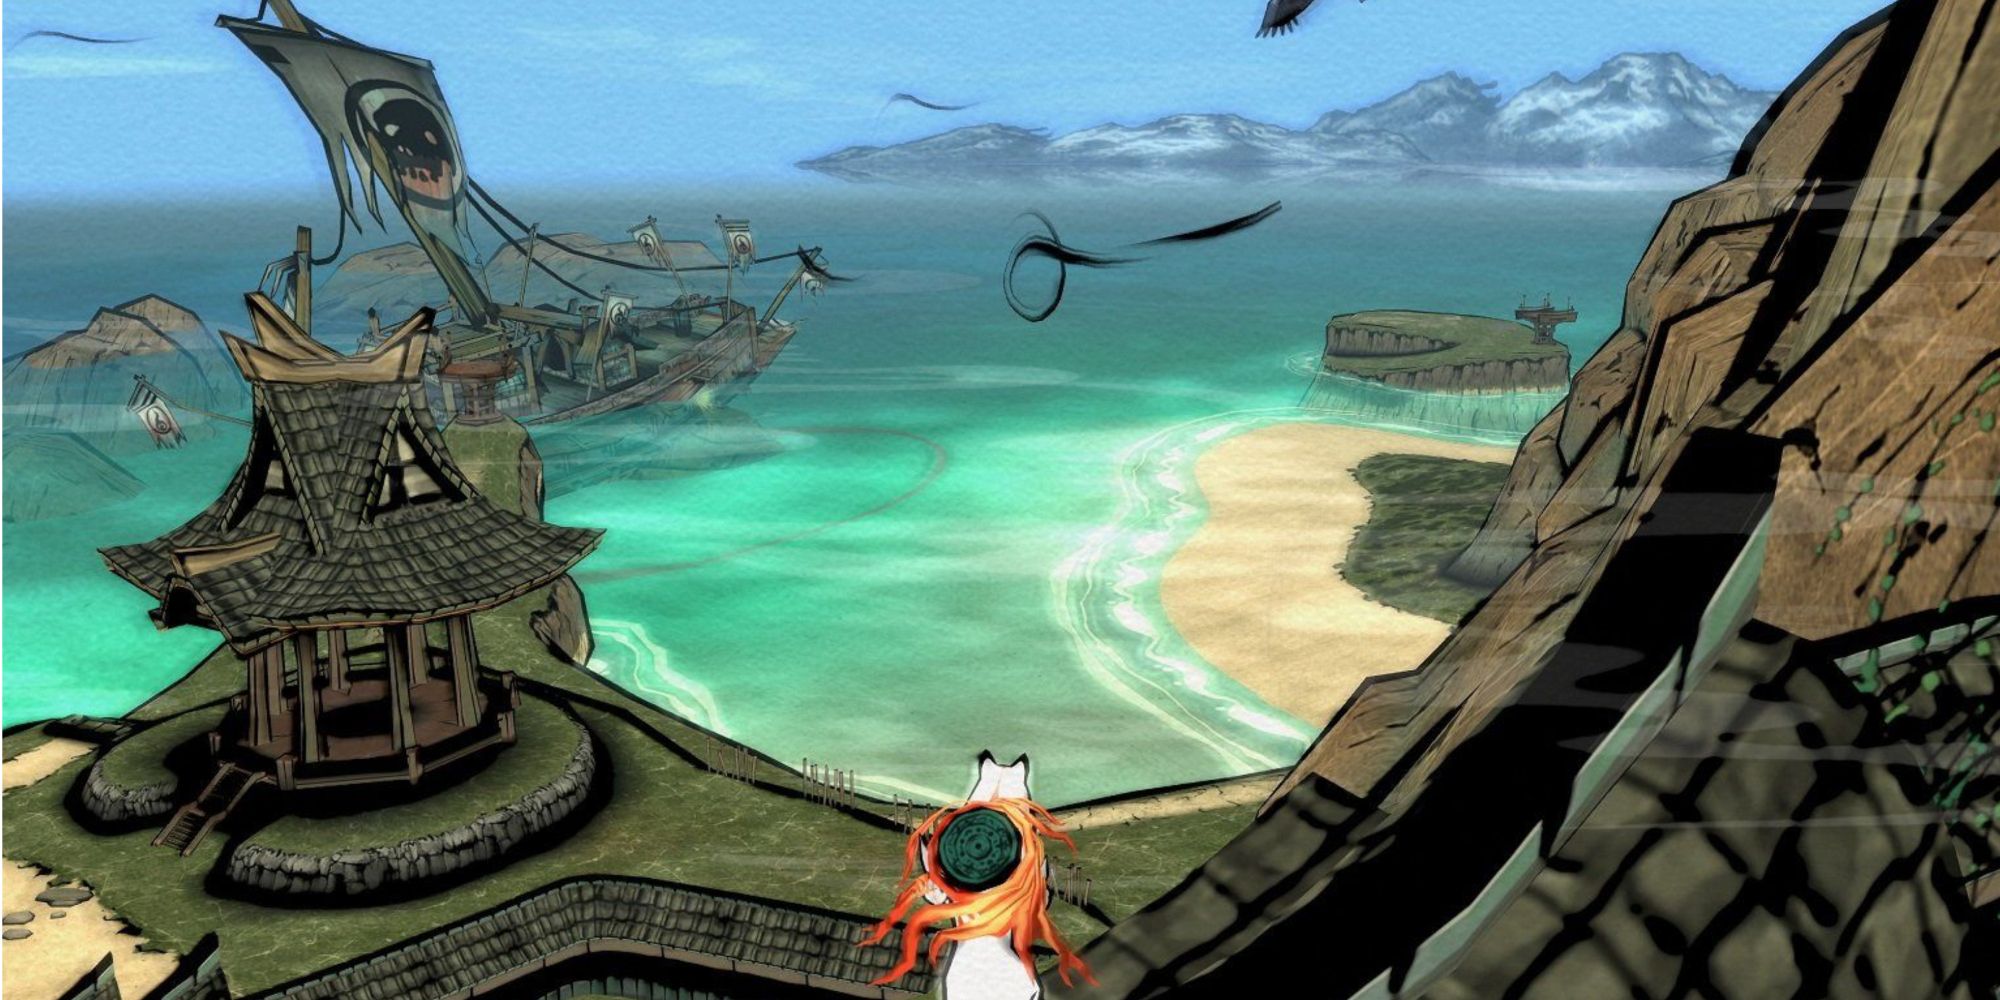 Okami resting on a beach looking out at the ocean